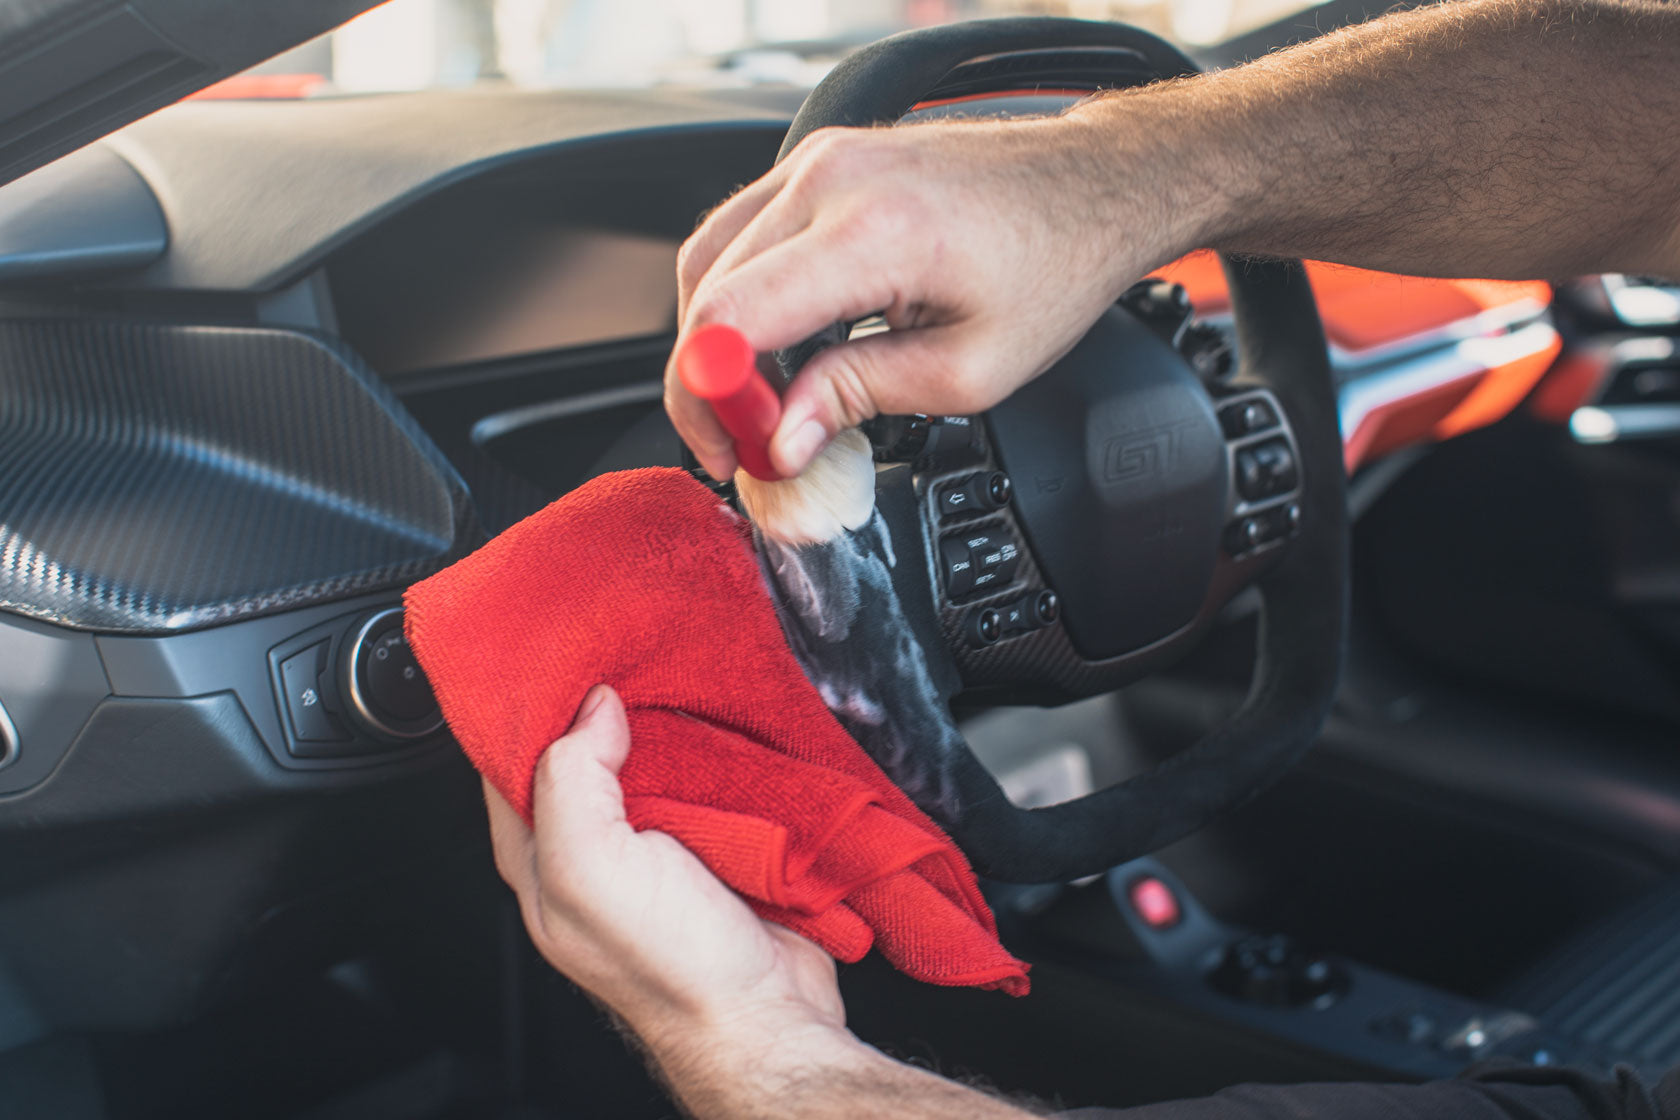 How to choose which Alcantara Your Car Needs